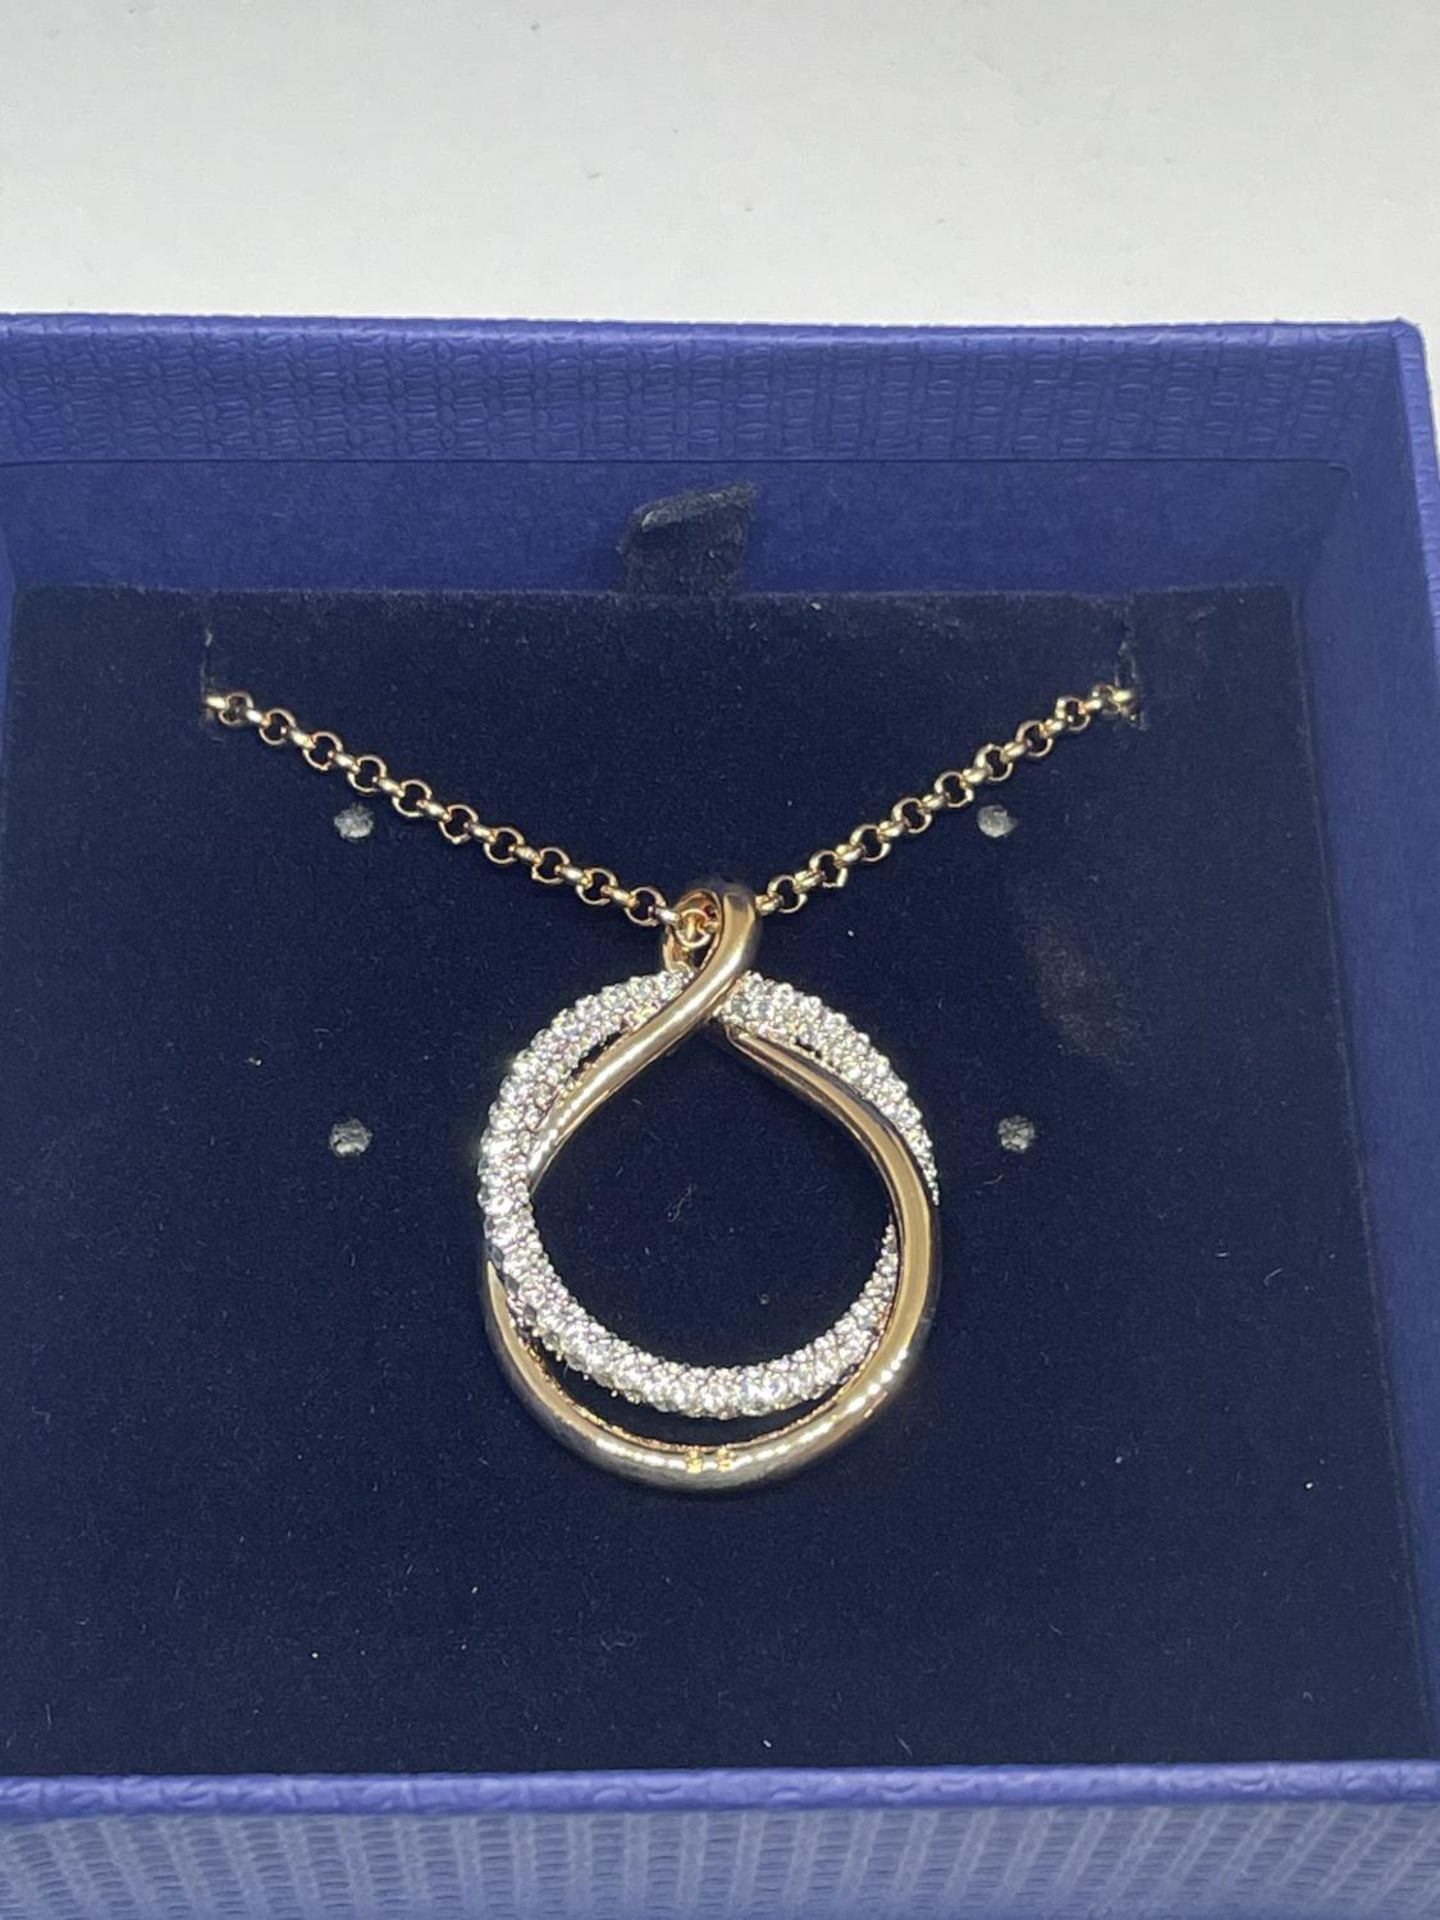 A SWAROVSKI CRYSTAL NECKLACE WITH PENDANT IN A PRESENTATION BOX WITH SLEEVE